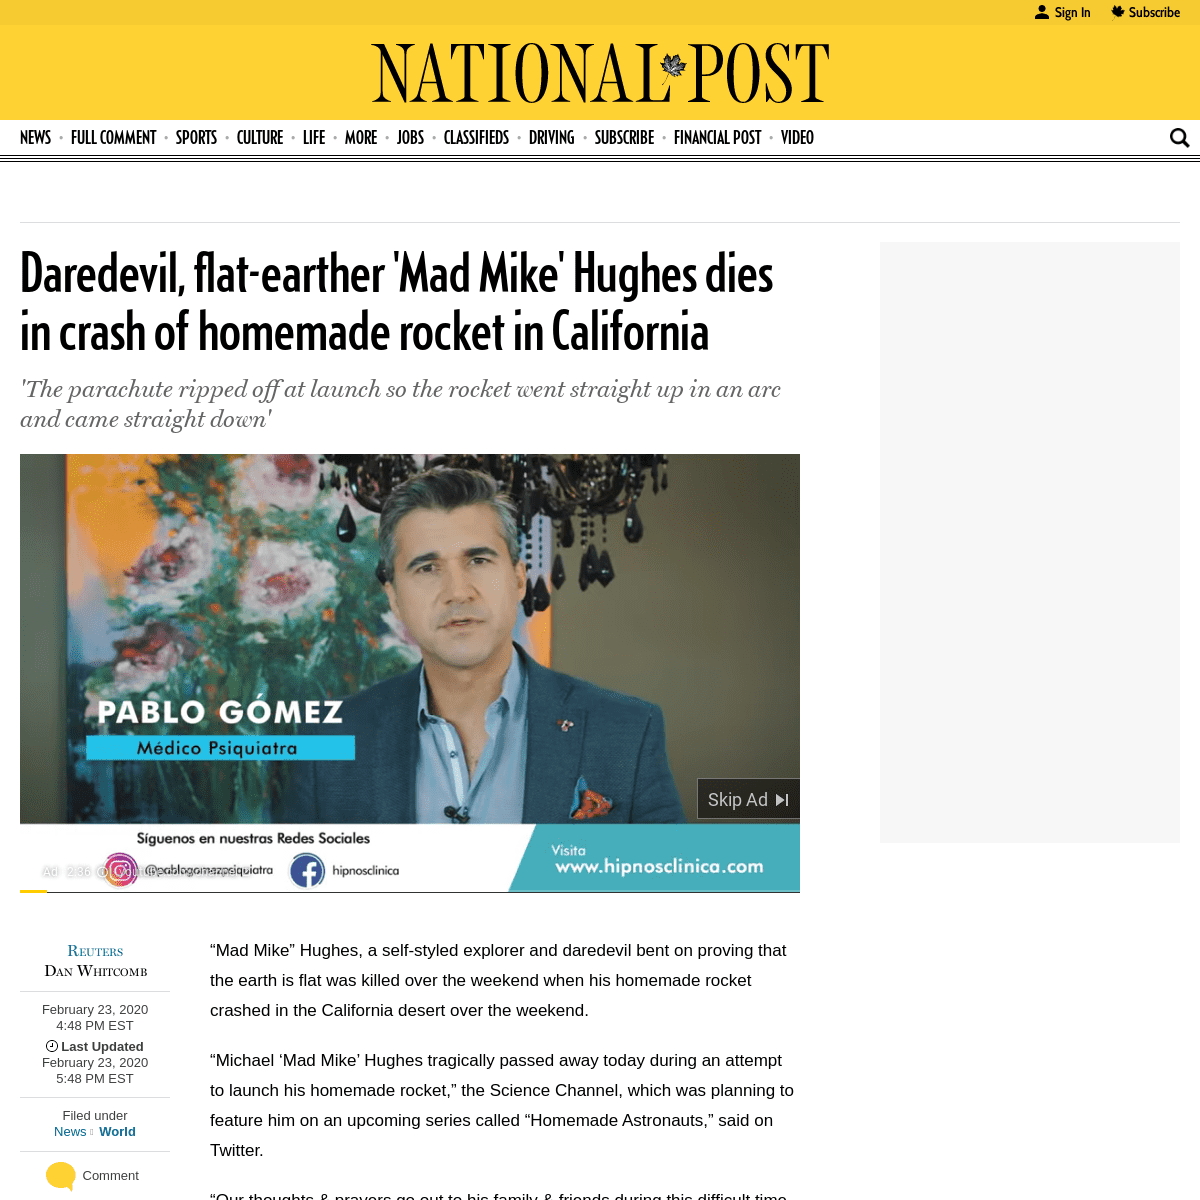 A complete backup of nationalpost.com/news/world/daredevil-mad-mike-hughes-dies-in-crash-of-his-homemade-rocket-in-california